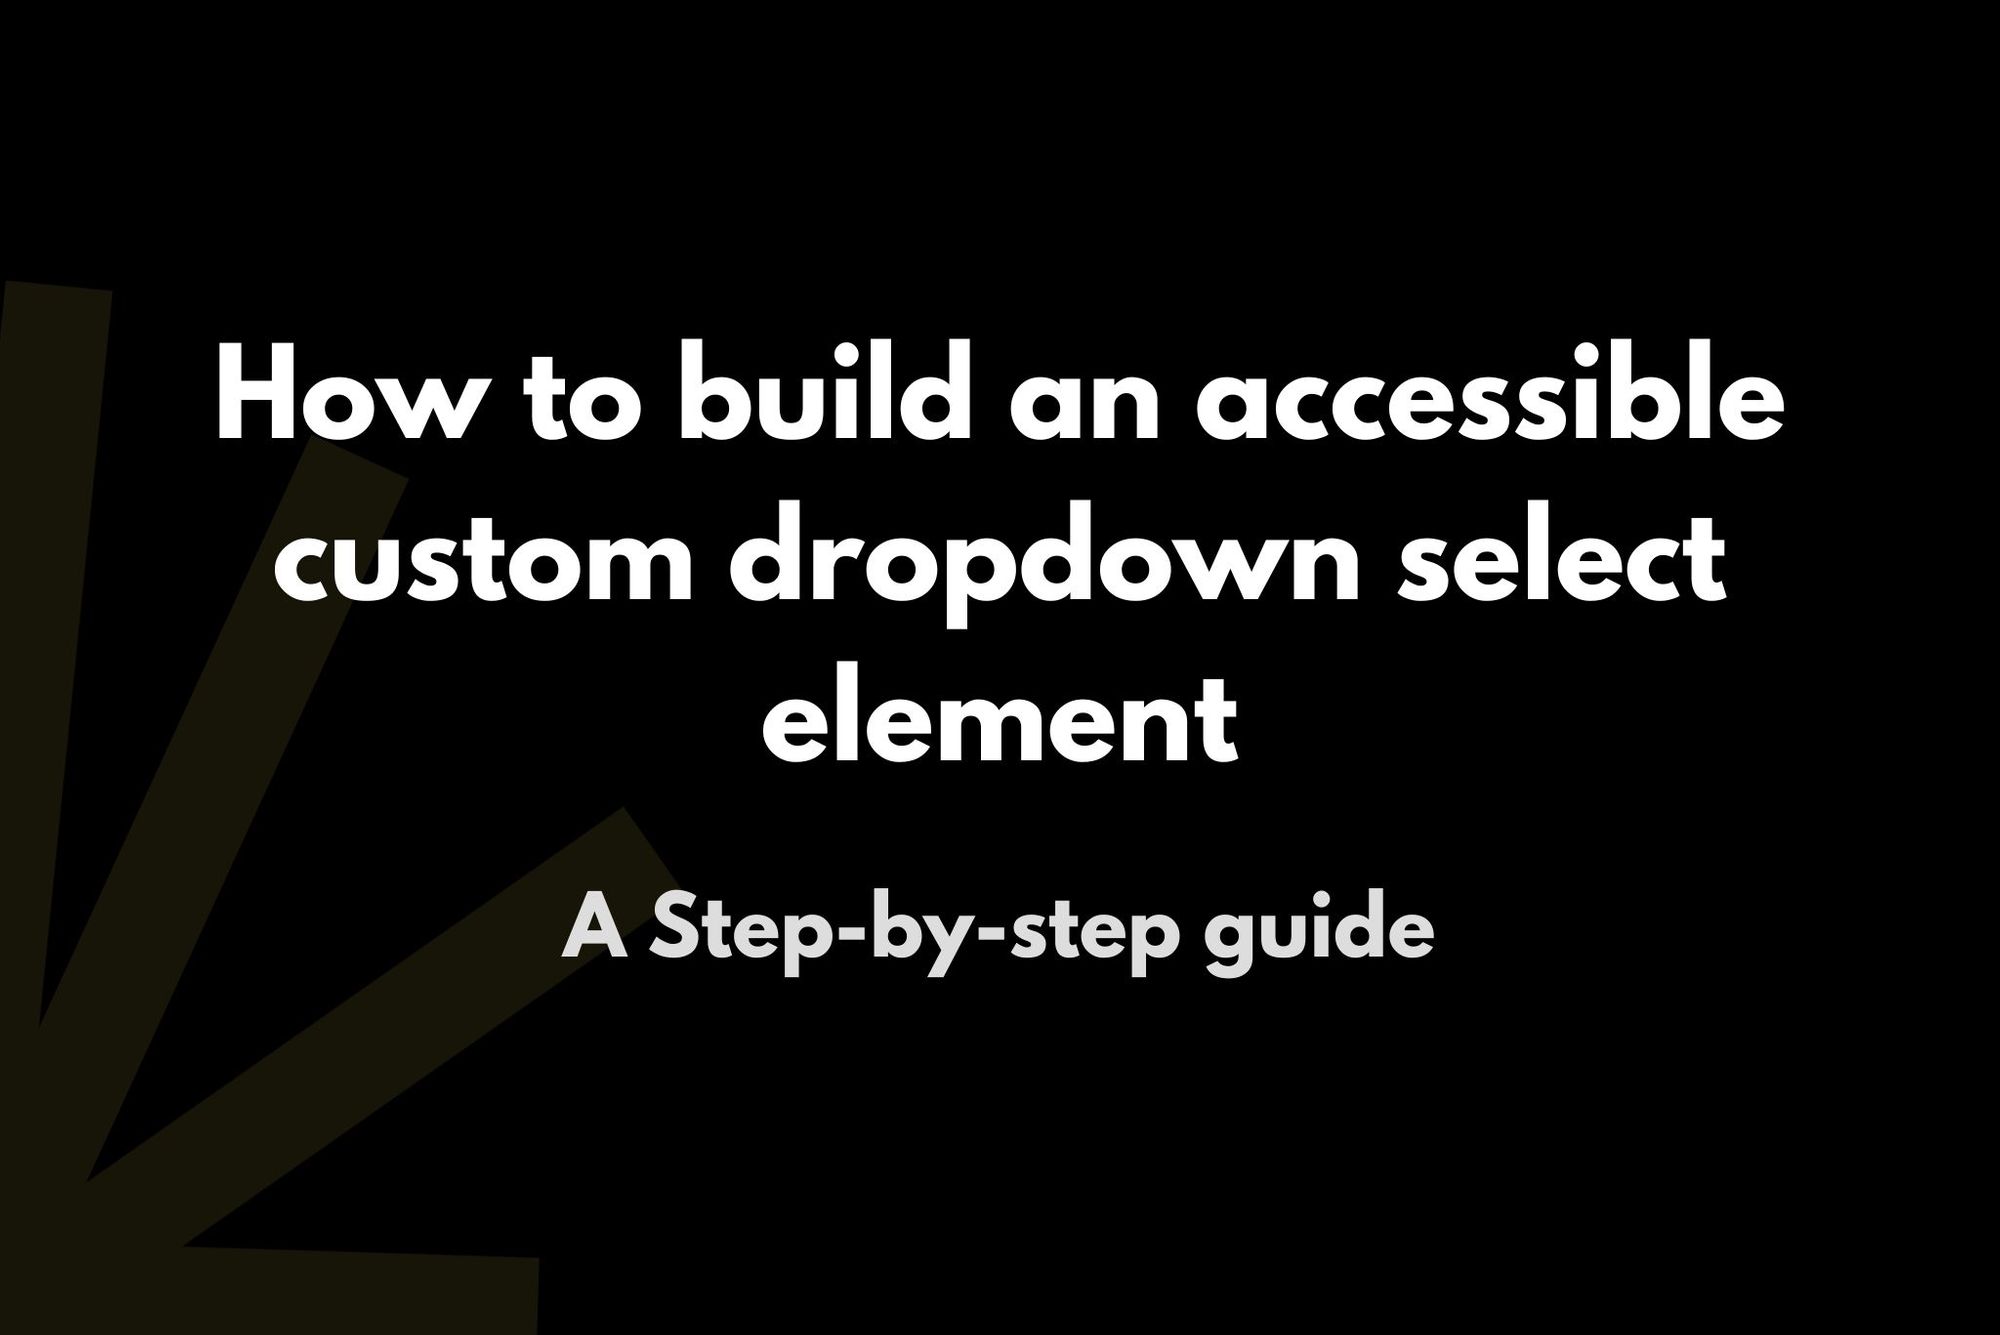 How to Build an Accessible Custom Dropdown Select Element